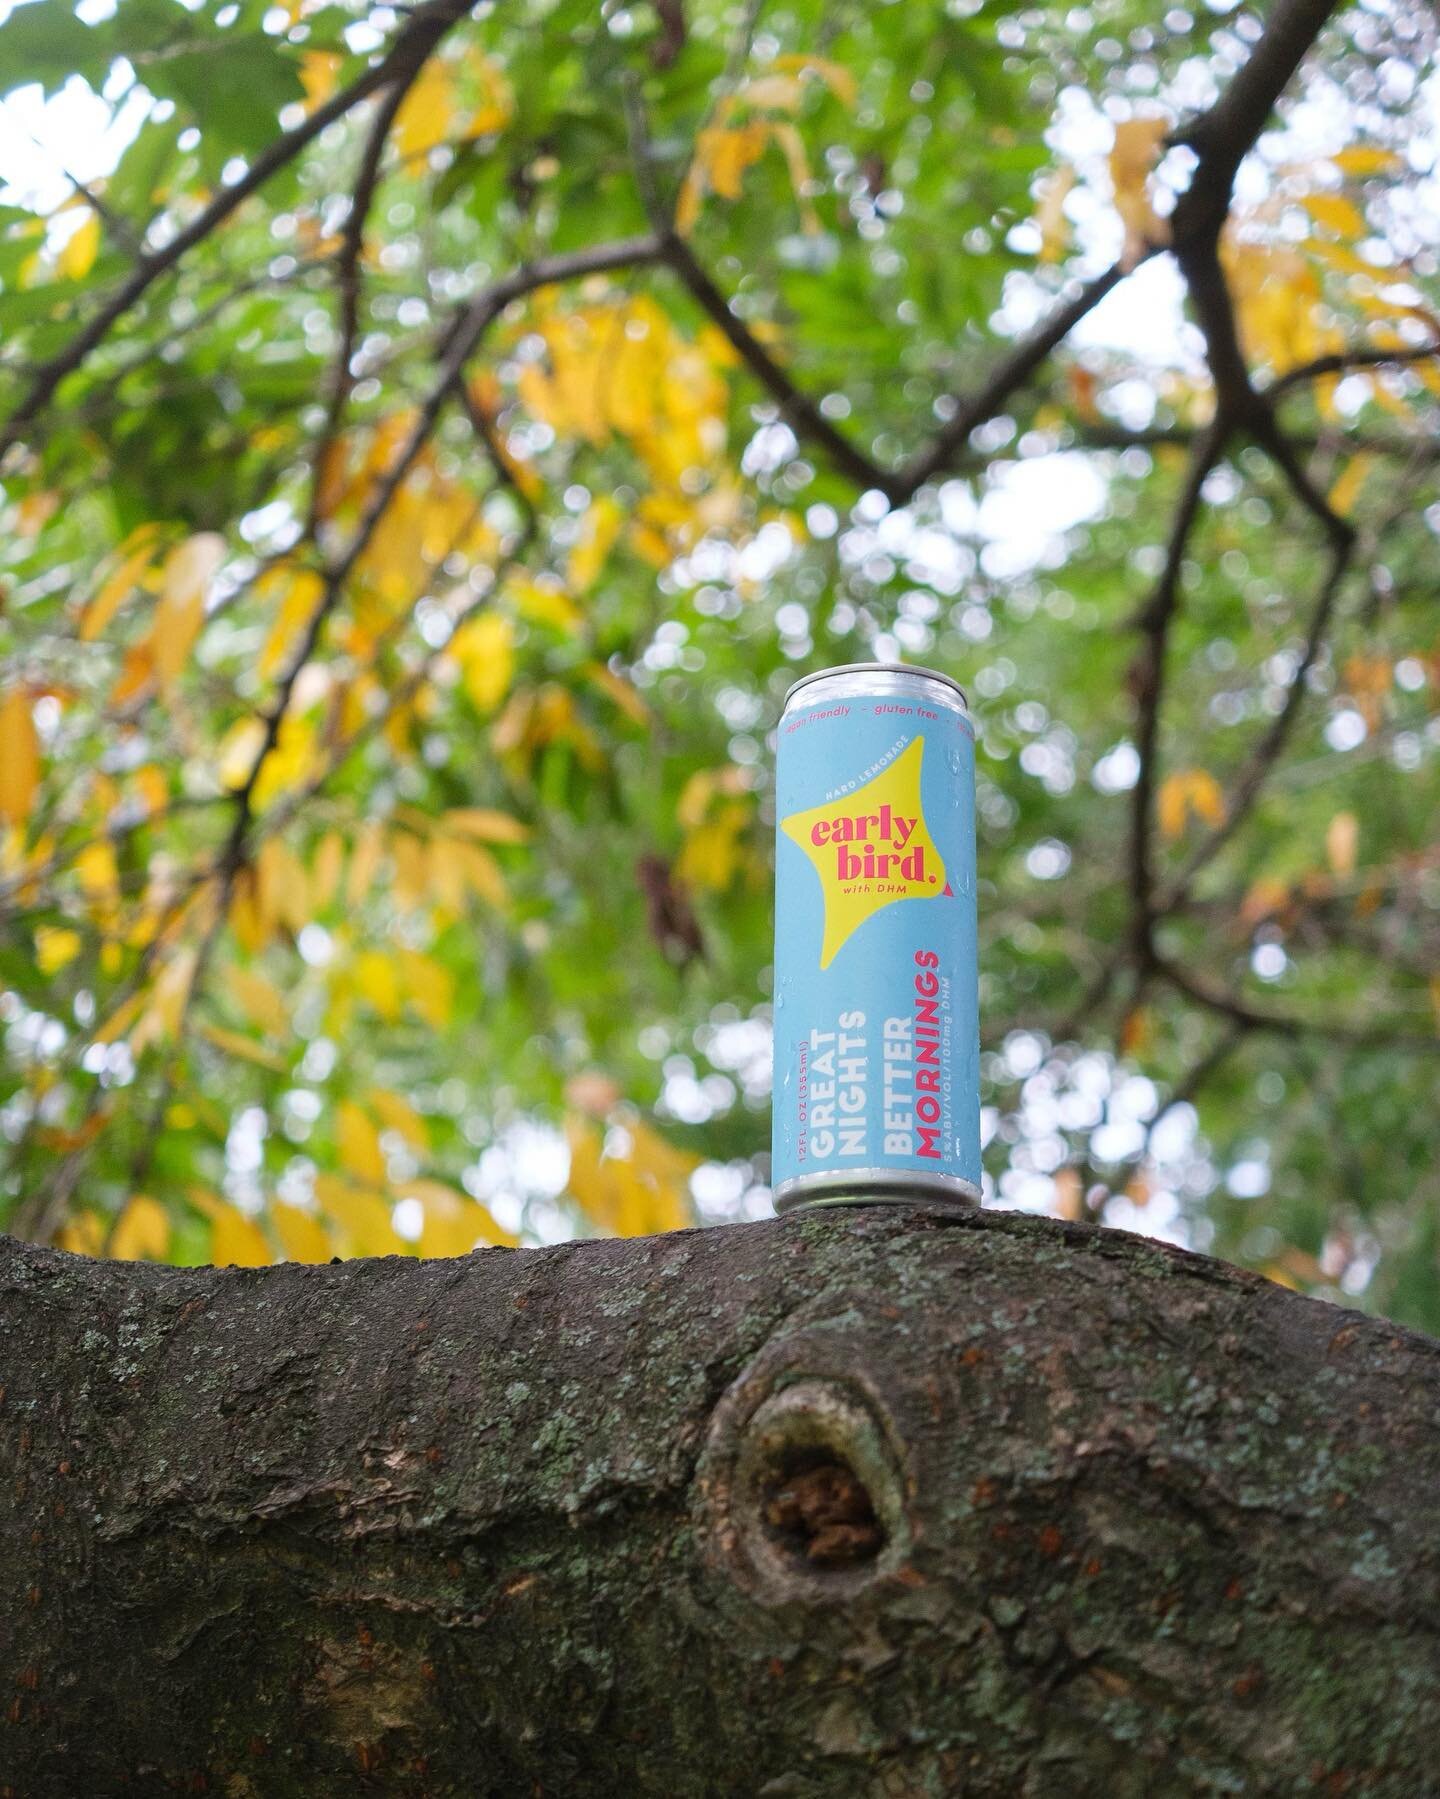 A bird in the hand is worth two in the bush: don&rsquo;t forget to grab yours for Monday night football!

#hardlemonade #dhmdetox #earlybirdflock #greatnightsbettermornings #alcohol #fall #centralpark #nfl #mondaynightfootball